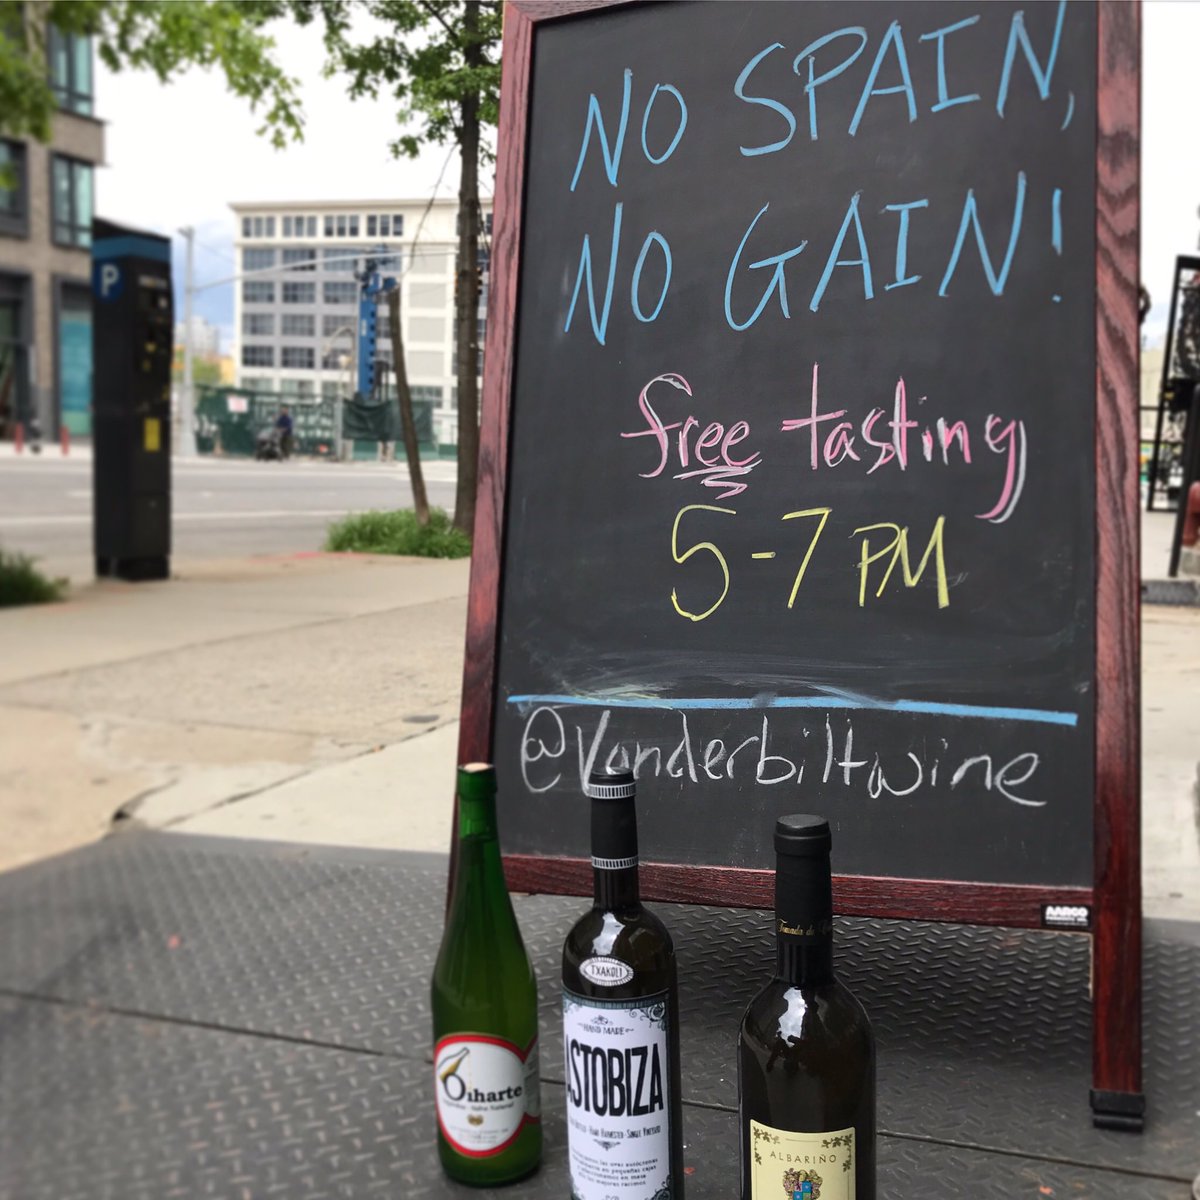 Stop by from 5-7pm for a #freetasting of the best northern #spanishwines has to offer.  @garydinkle at @fieldblendselections schools us.